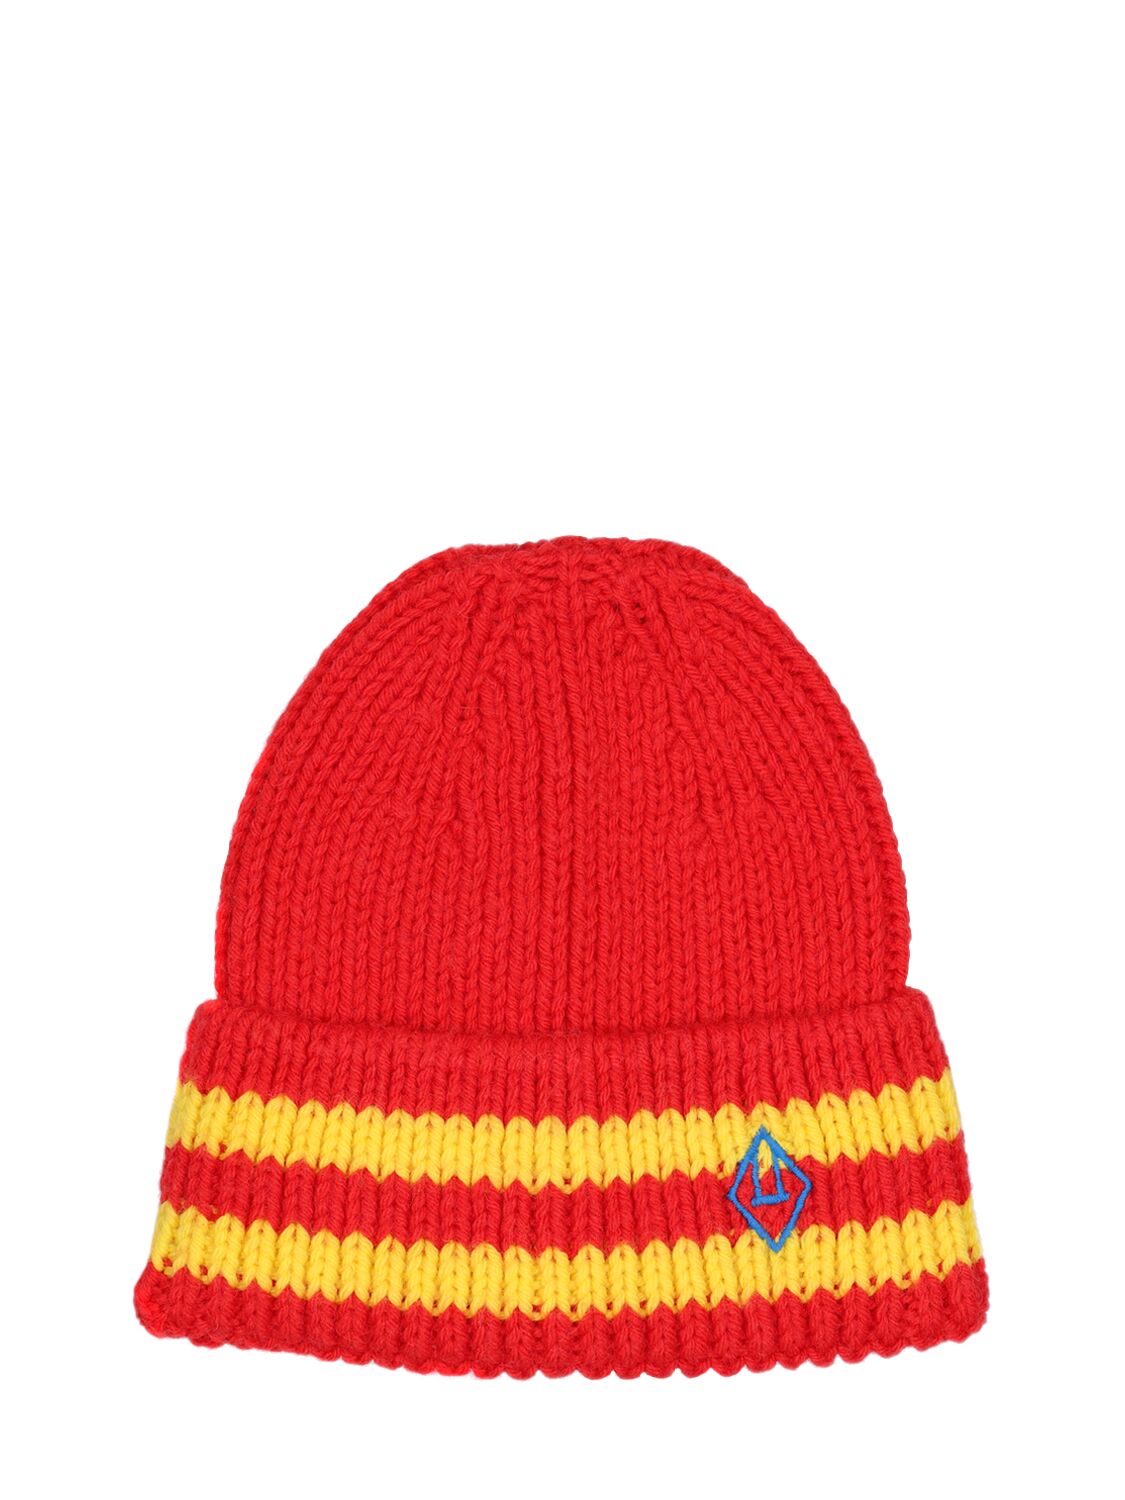 Image of Wool Knit Beanie